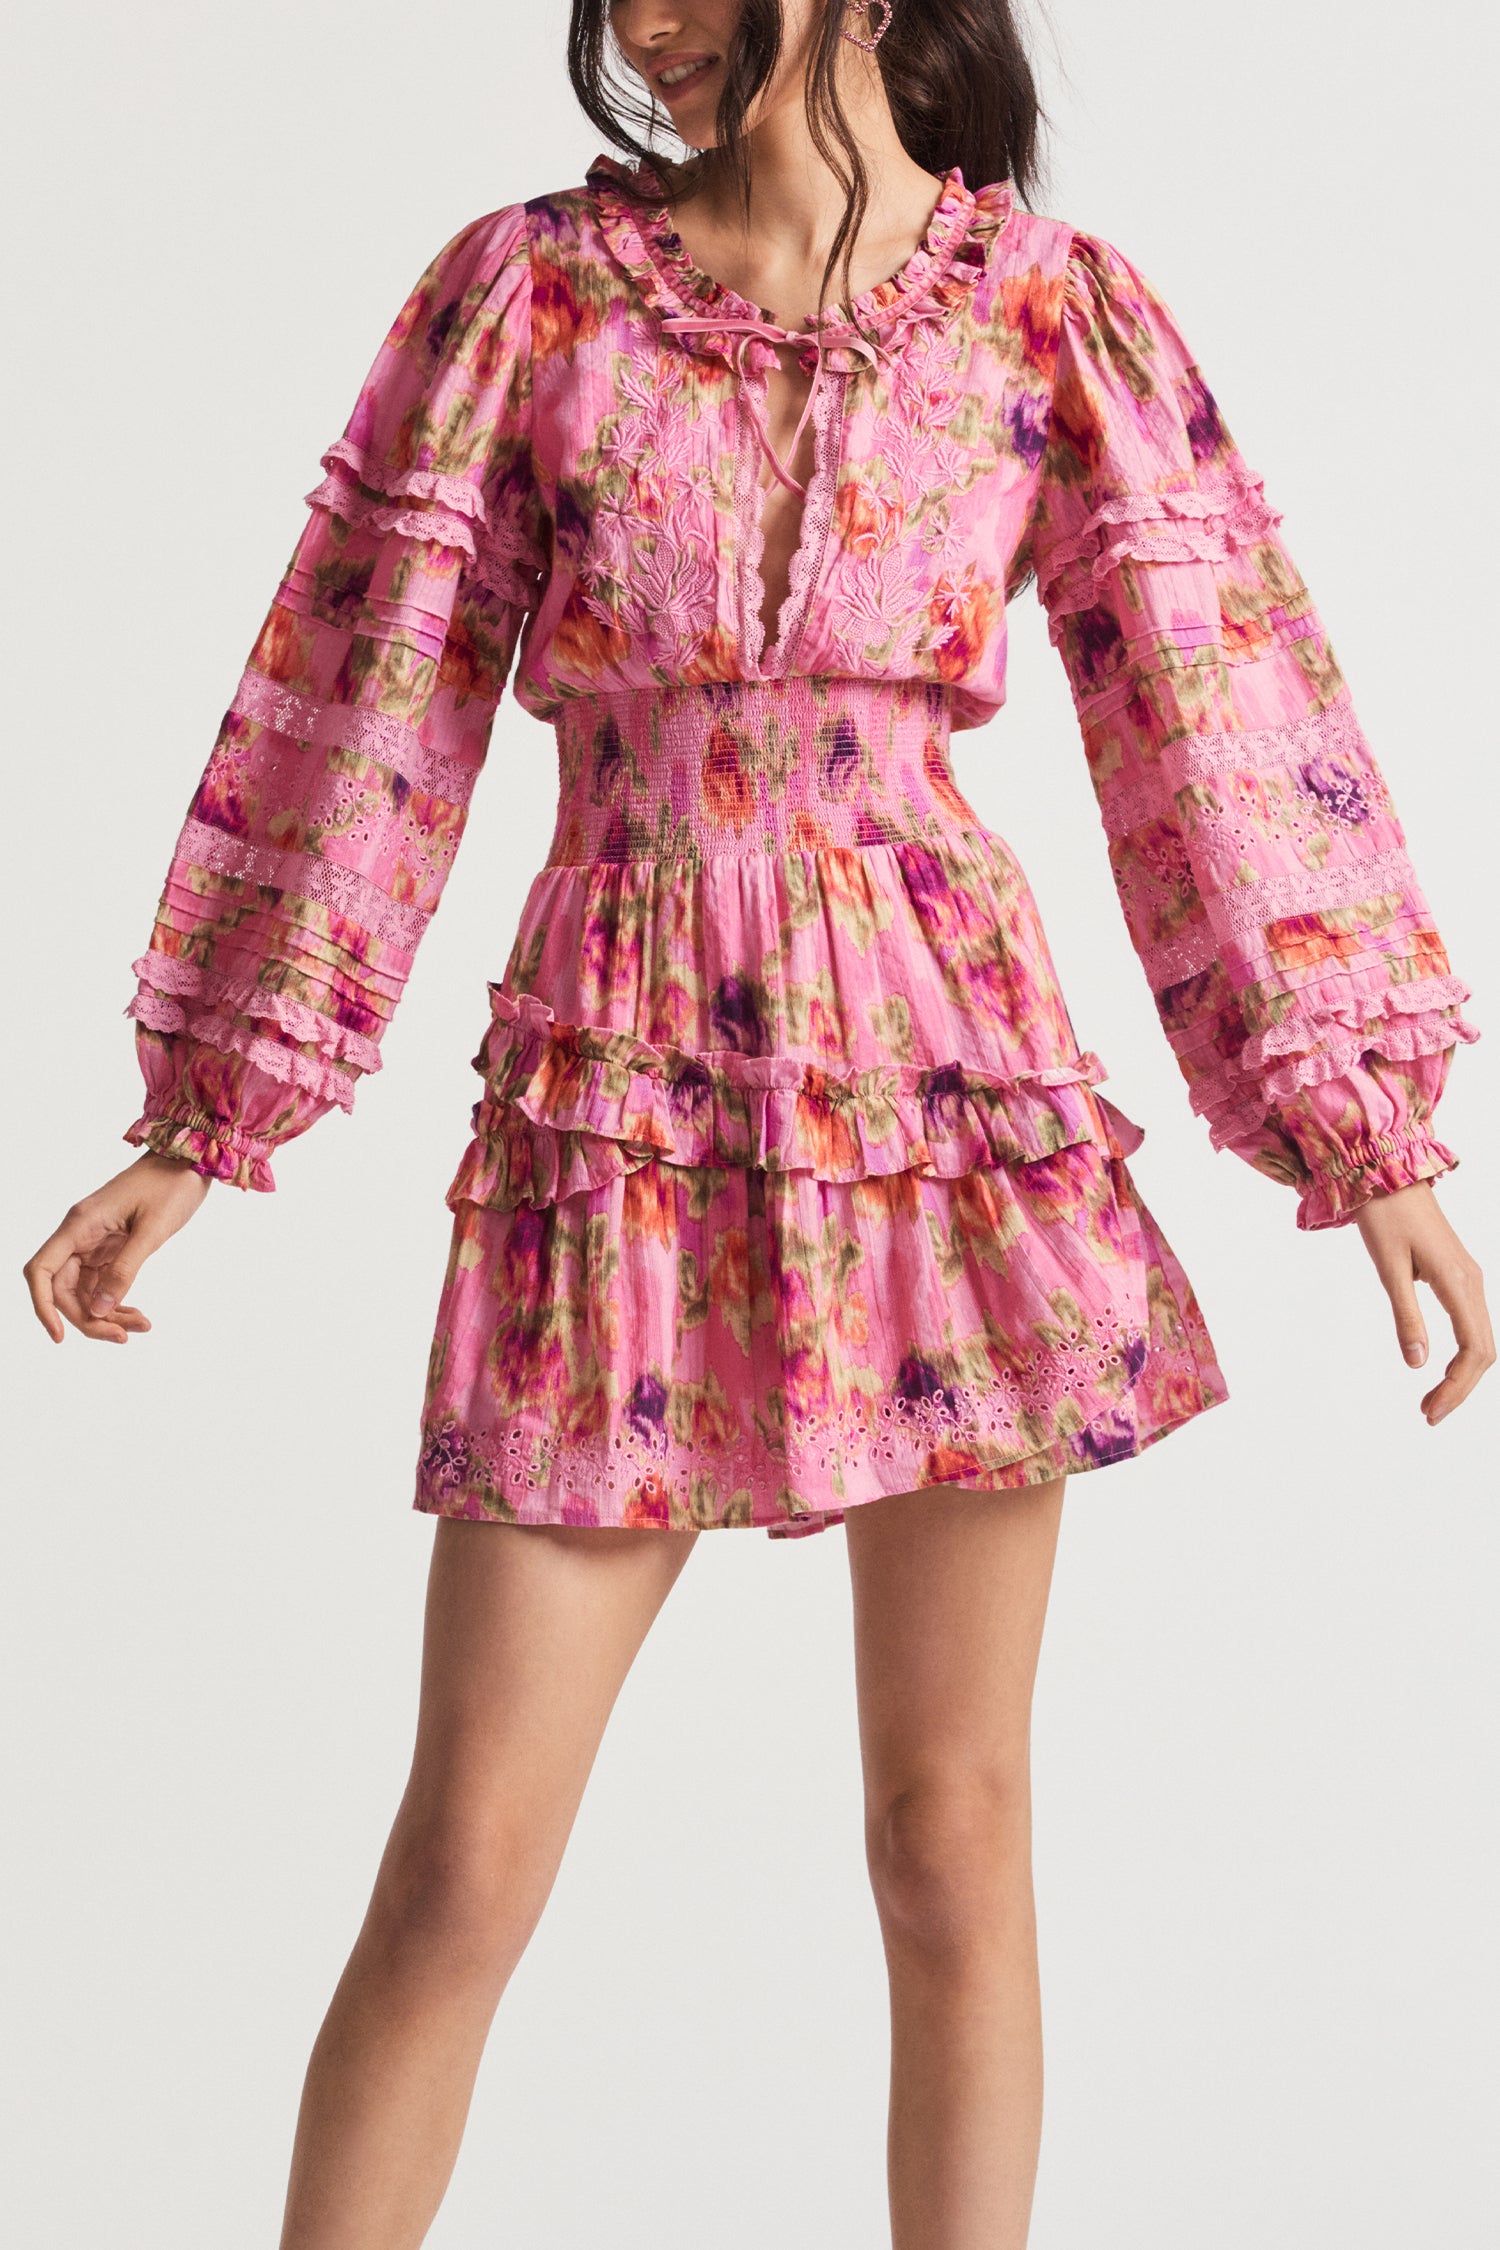 Pink mini dress with floral print with intricate embroidery and lace placements. At the center front, you can tie at the neck, ruffle detail, a smocked waist, and skirt with ruffles and embroidery around the sweep.